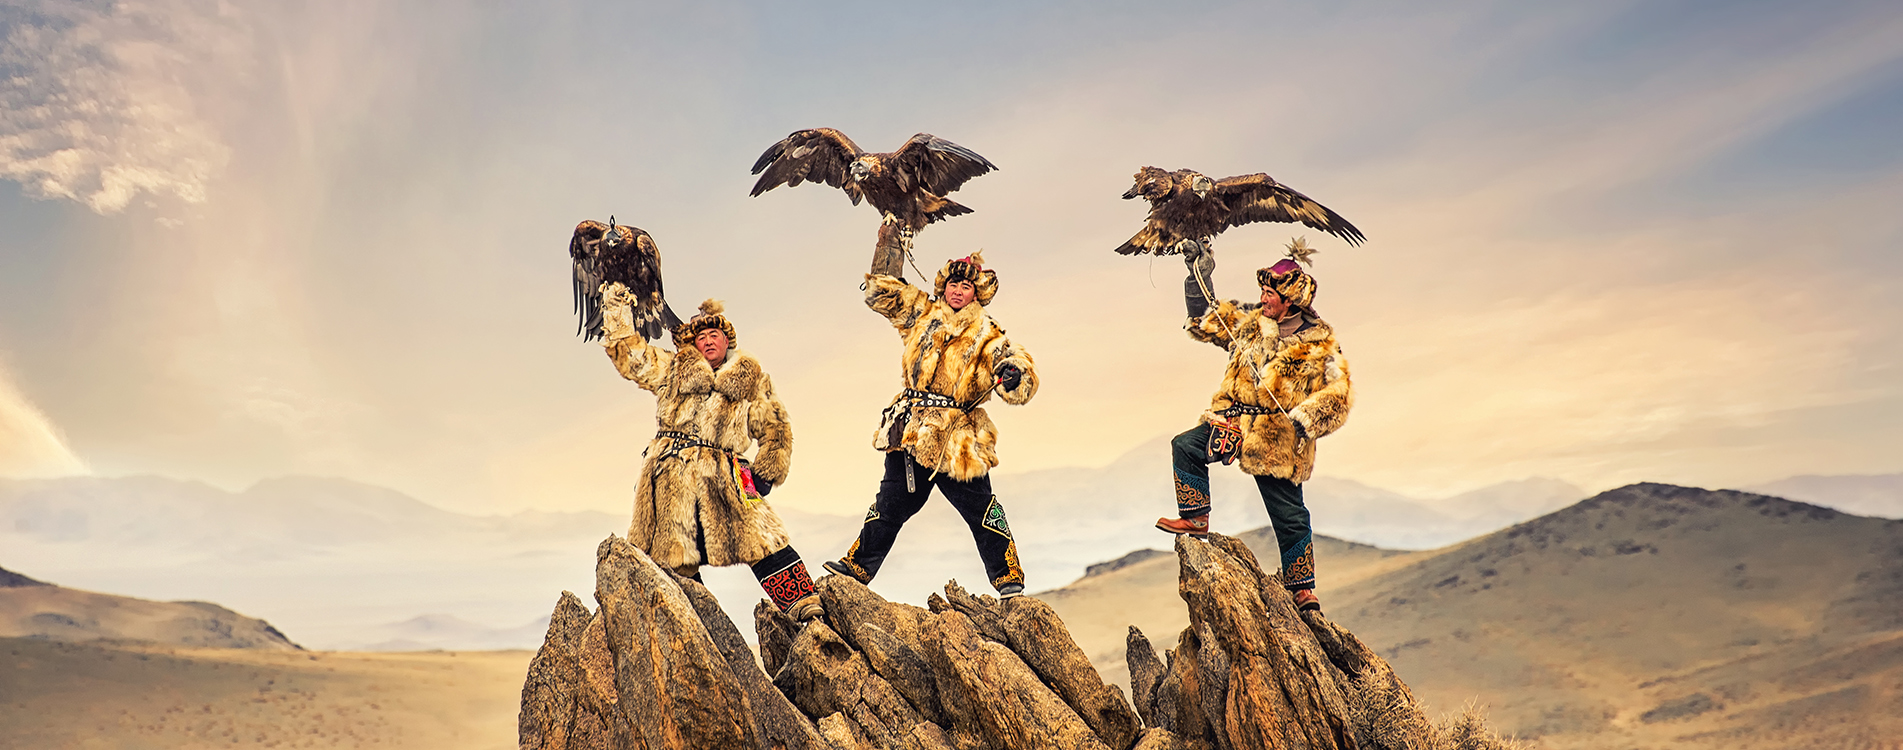 Mongolia's Fascinating Eagle Hunting Tradition and the Golden Eagle Festival